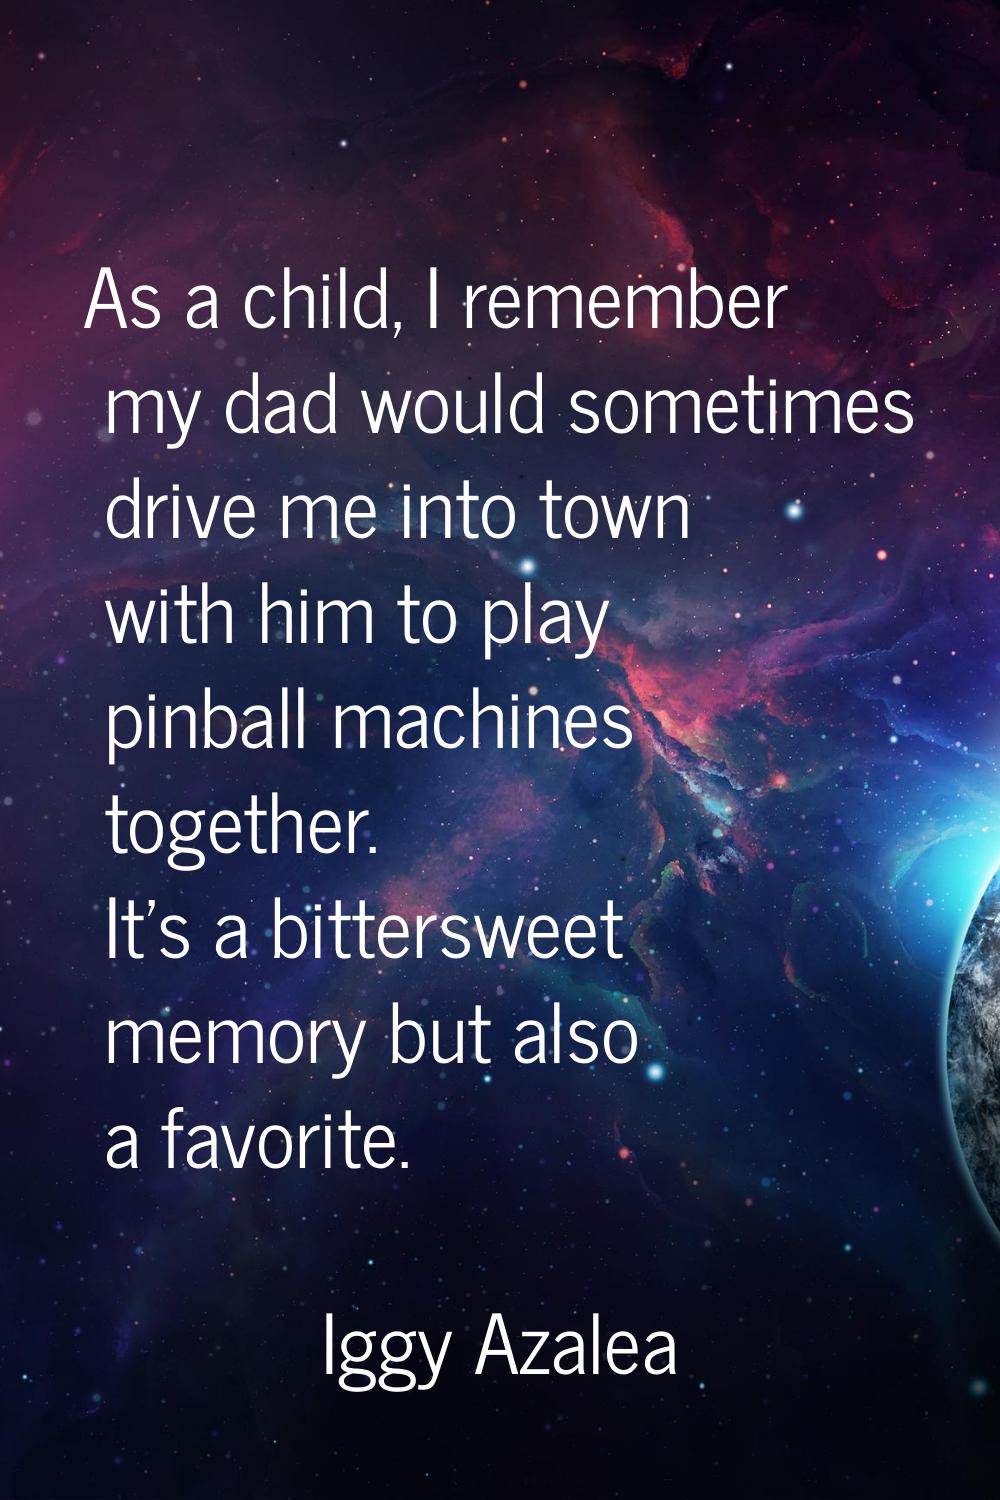 As a child, I remember my dad would sometimes drive me into town with him to play pinball machines 